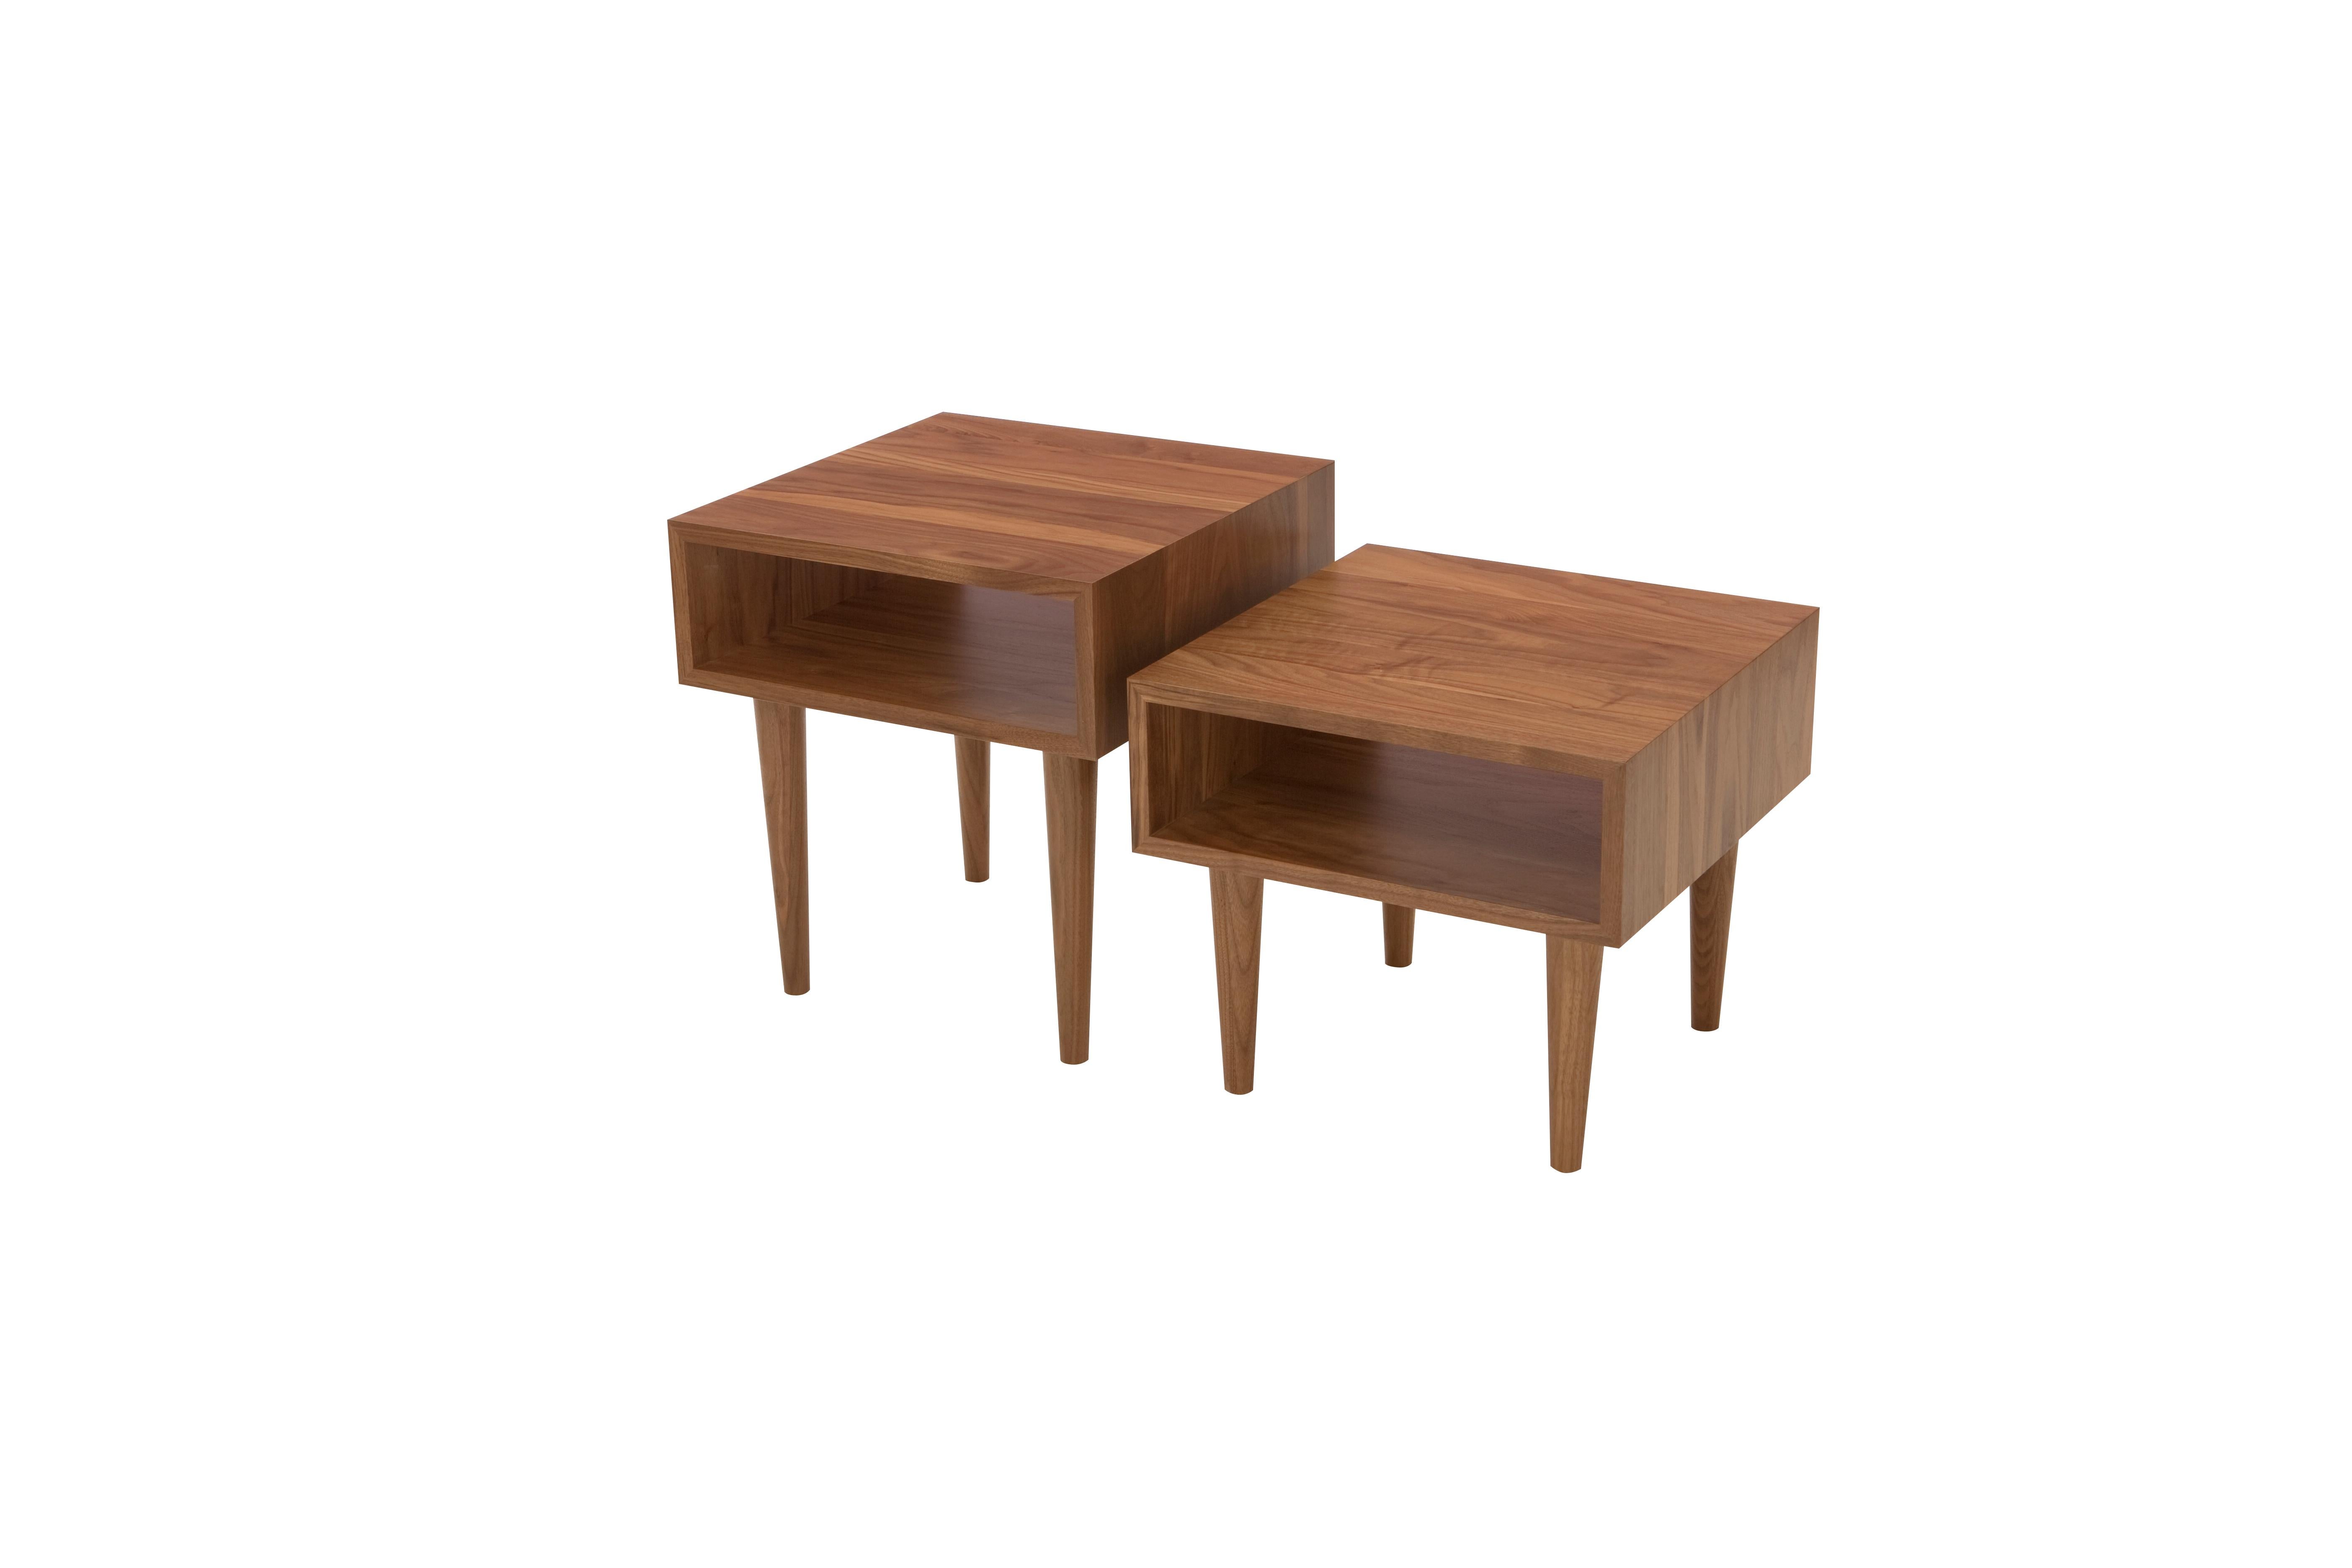 The classic side table, part of our classic Series. Follows the clean, simple lines of our Classic Coffee Table and Classic Credenzas. The classic side table is extremely functional and versatile with thoughtful proportions along side the other